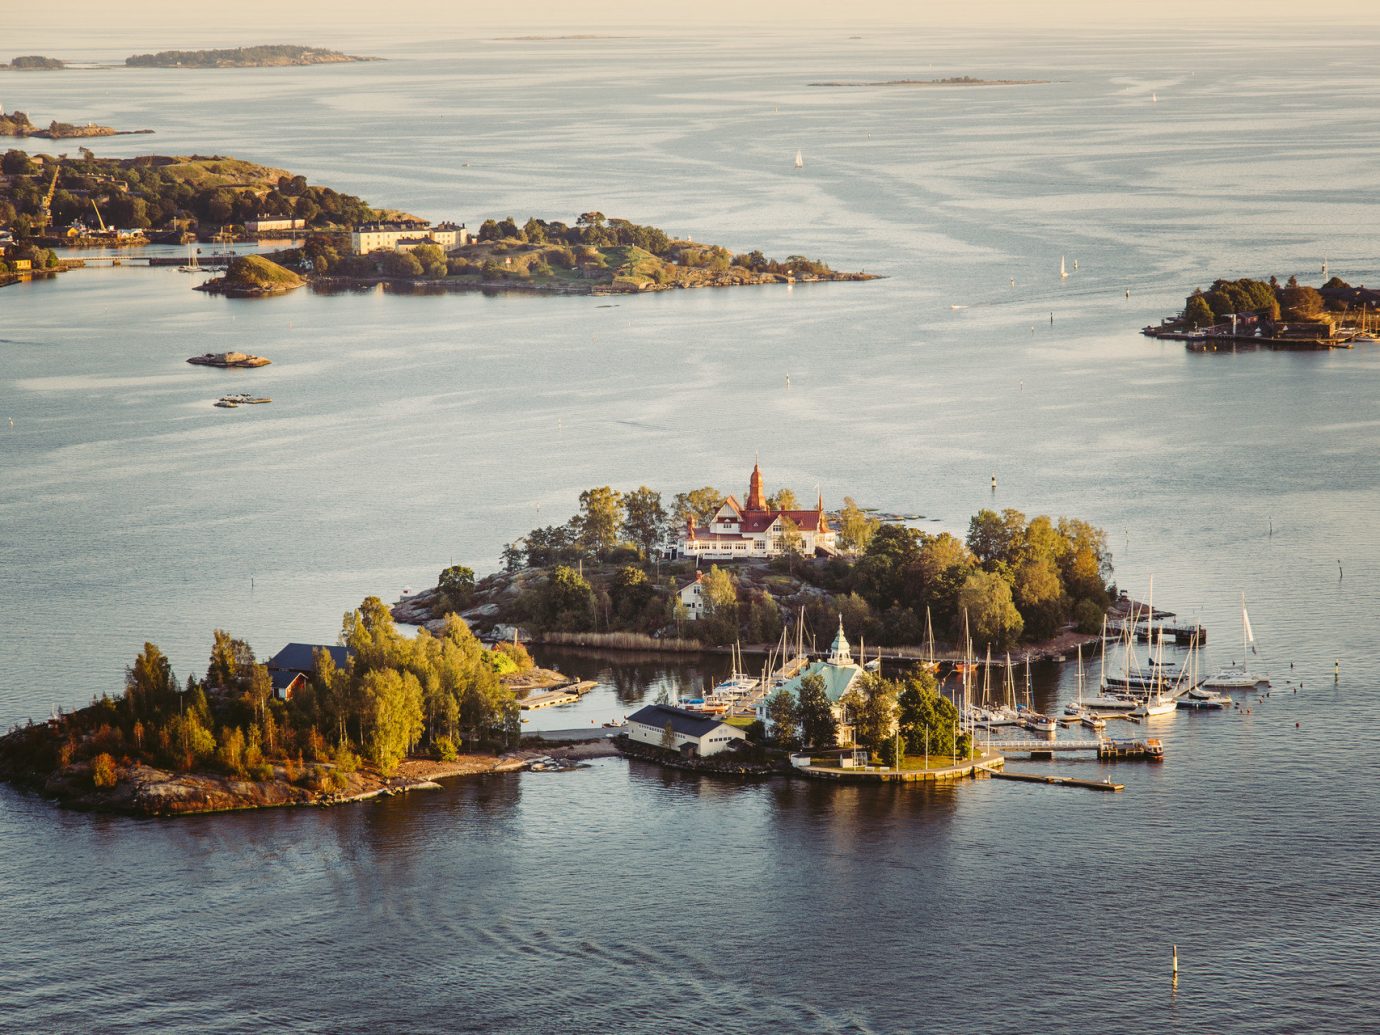 Finland Trip Ideas water outdoor Boat Sea shore Coast Harbor body of water Ocean scene reflection Beach bay vehicle boating Nature wave cove islet watercraft several